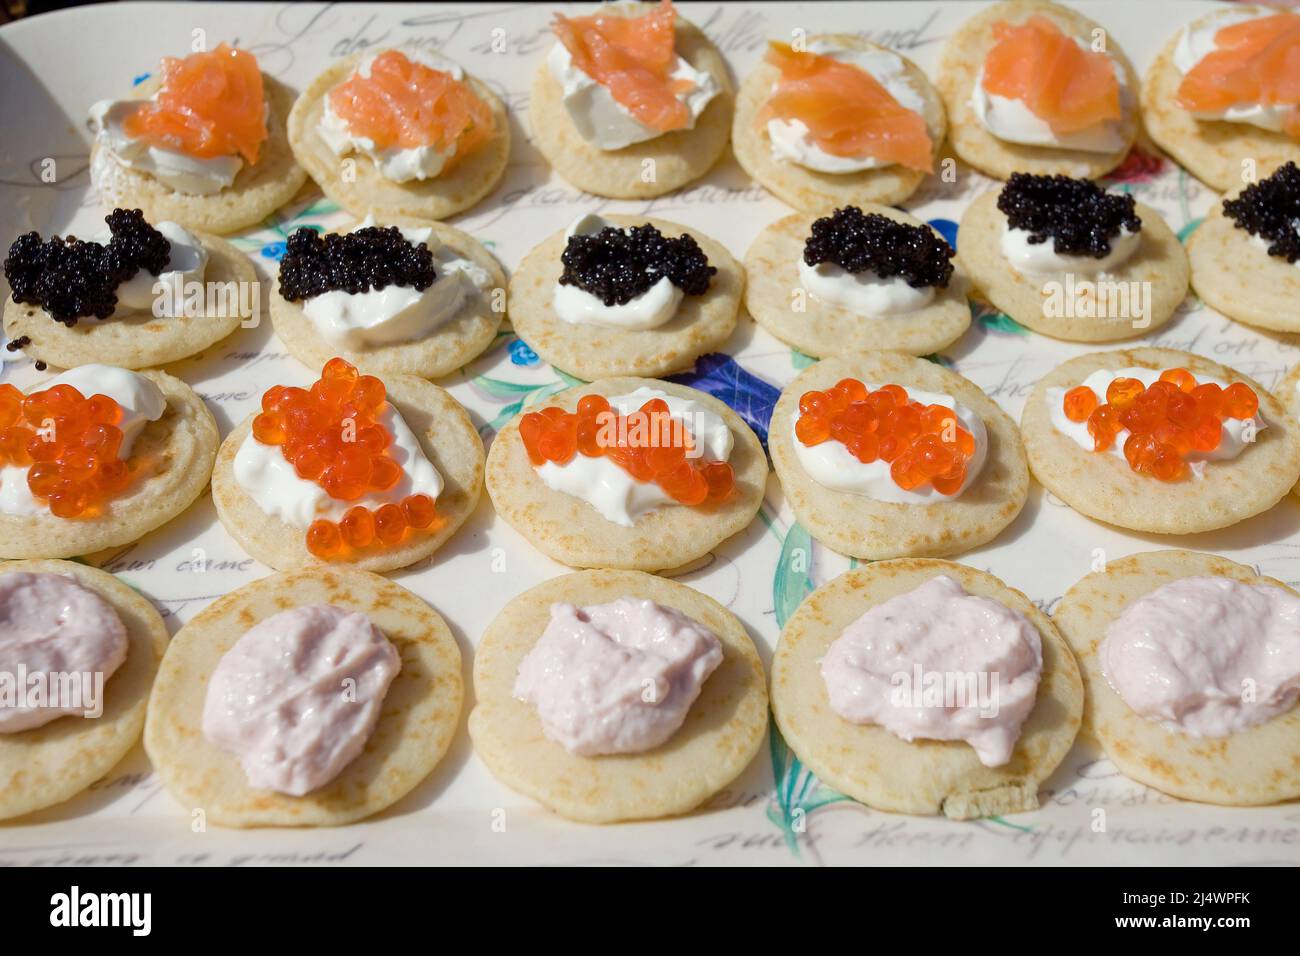 Blini with an assortment of toppings Stock Photo